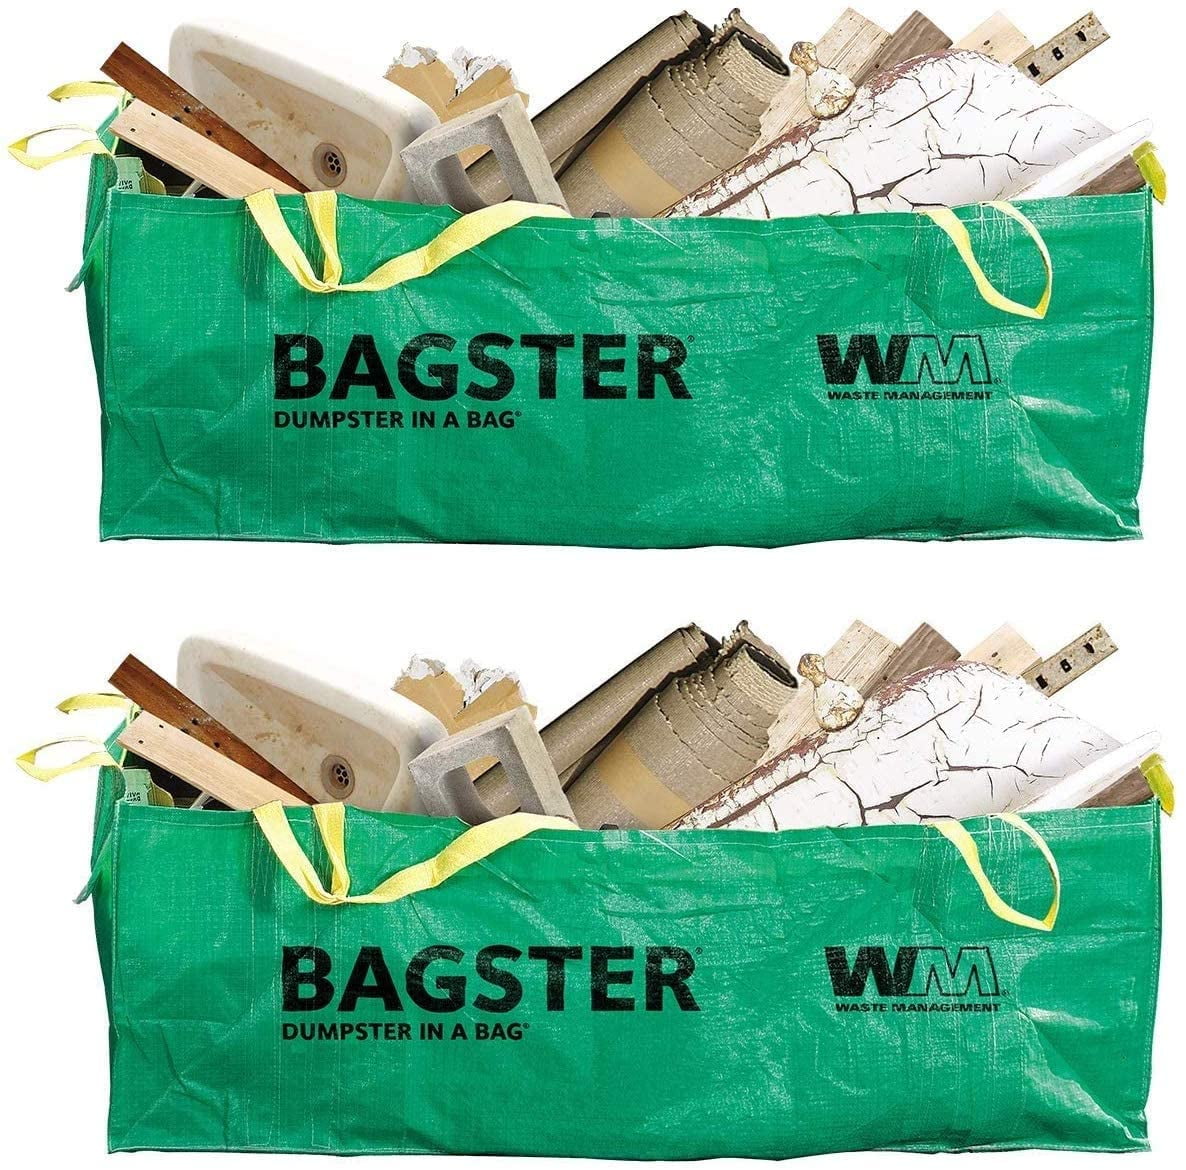 2 Bag BAGSTER 3CUYD Dumpster in a Bag Holds up to 3,300 lb Green 